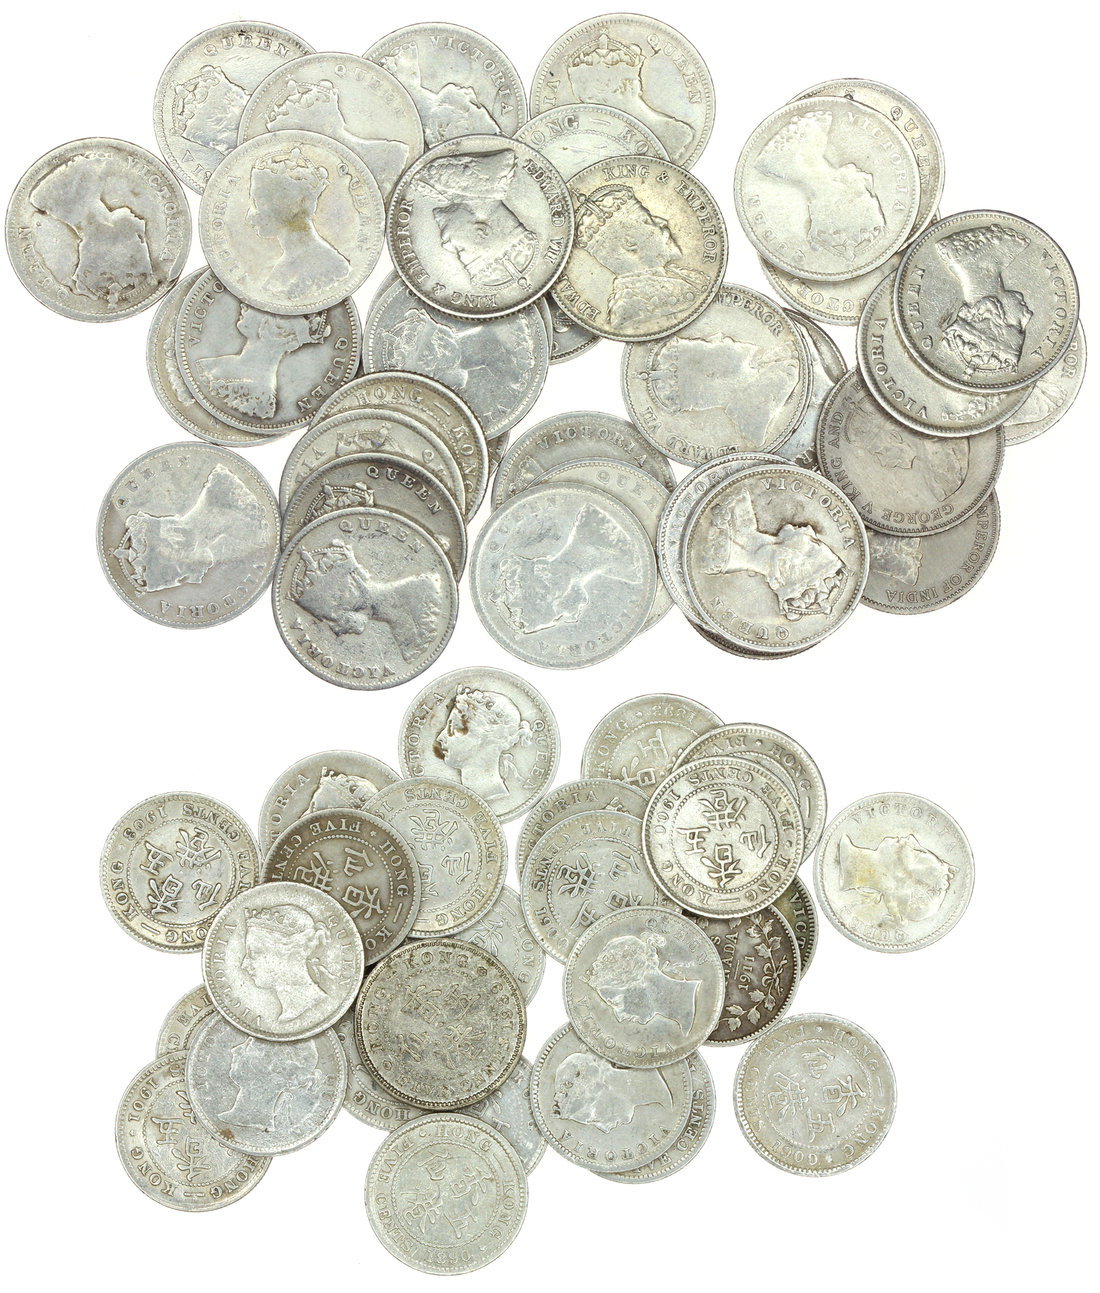 Hong Kong, mixed lot of 27 x 5 cents and 39 x 10 cents, mostly silver, a few copper nickel, togethe